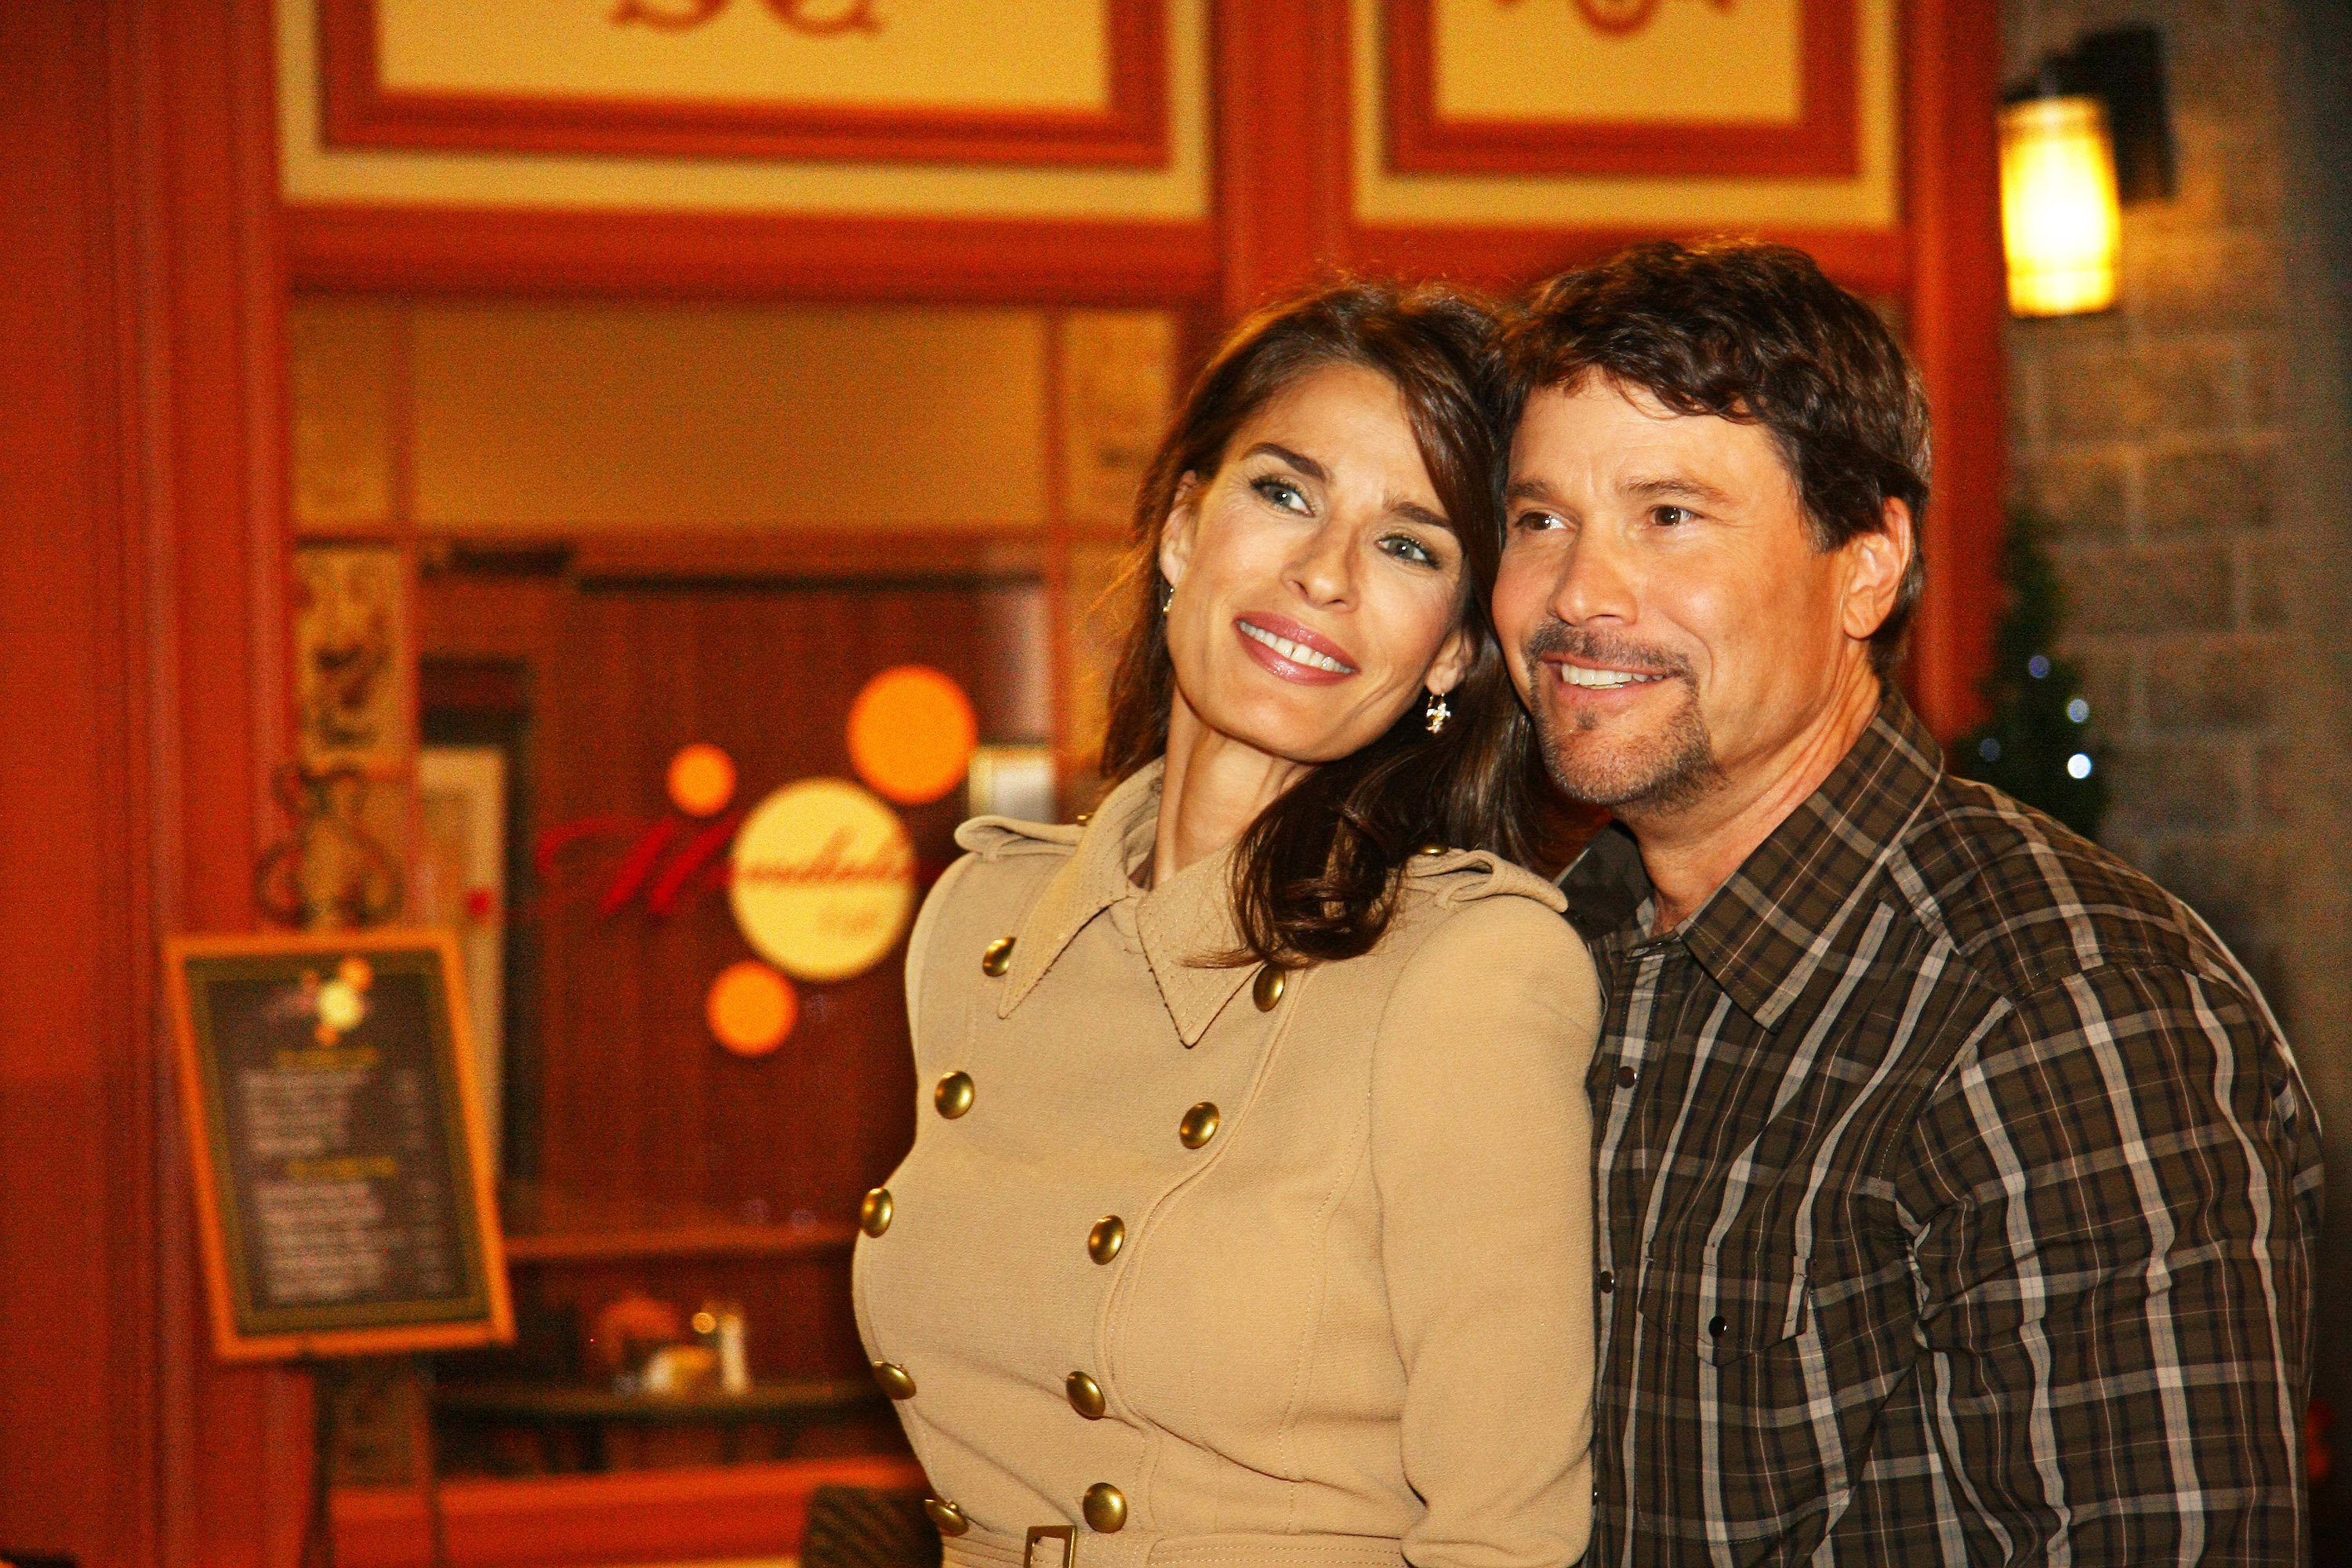 'Days of Our Lives: Beyond Salem' Season 2 will feature the return of Hope and Bo Brady.